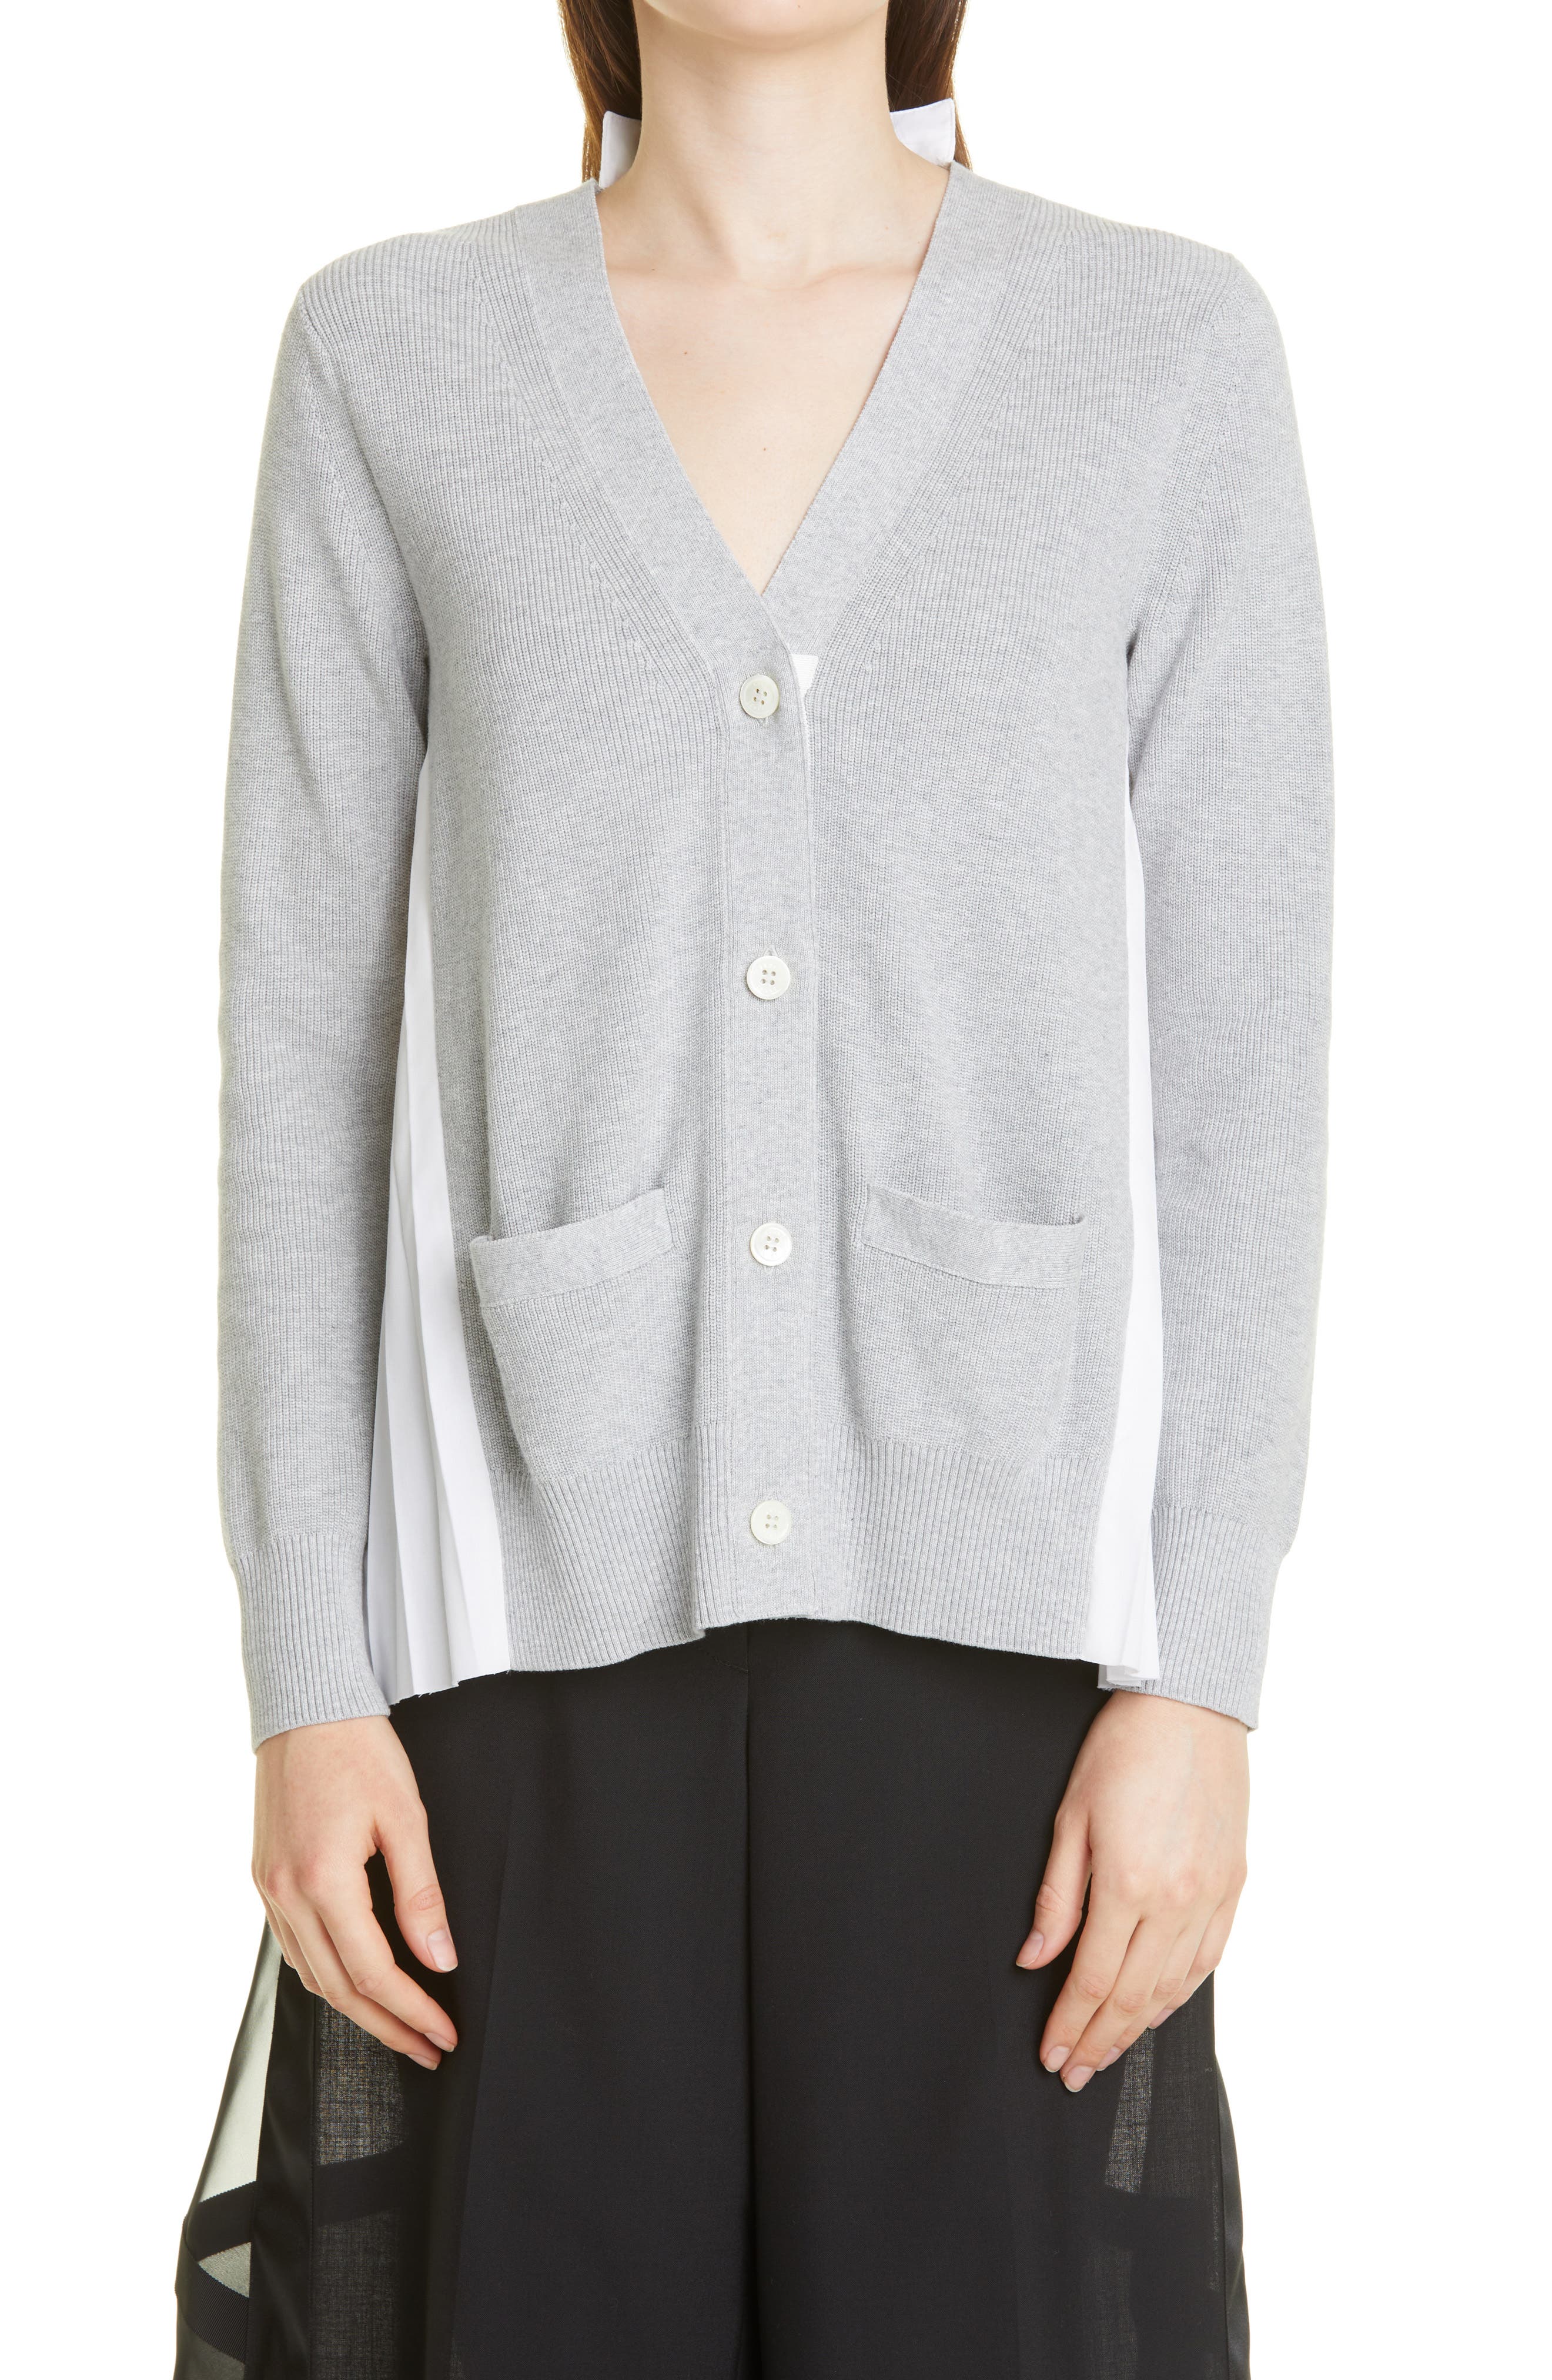 Sacai Pleated Back Cotton Cardigan in Light Grey/White at Nordstrom, Size 1